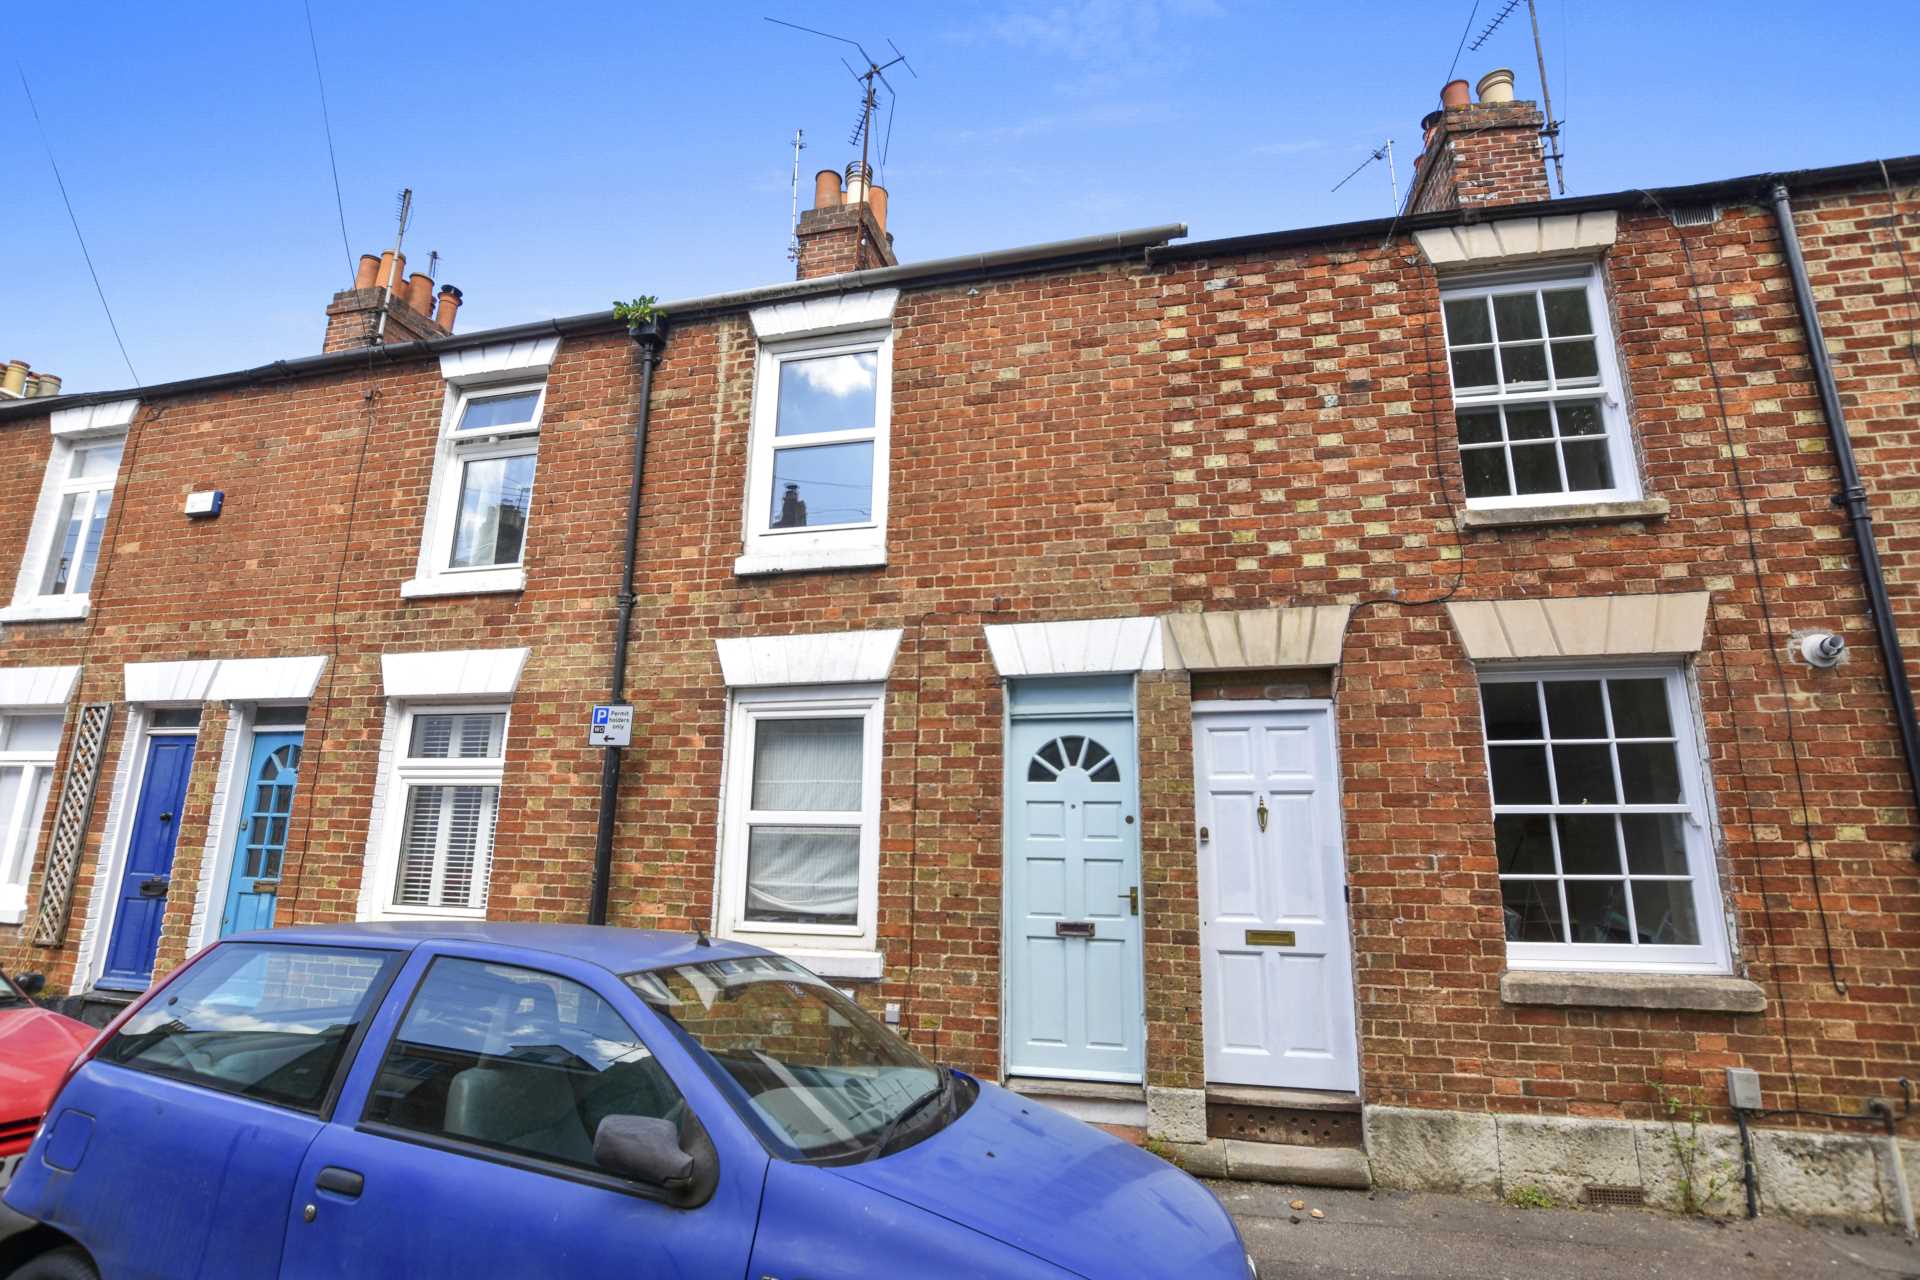 2 bed Mid Terraced House for rent in Oxford. From James C Penny Estate Agents - Central North Oxford